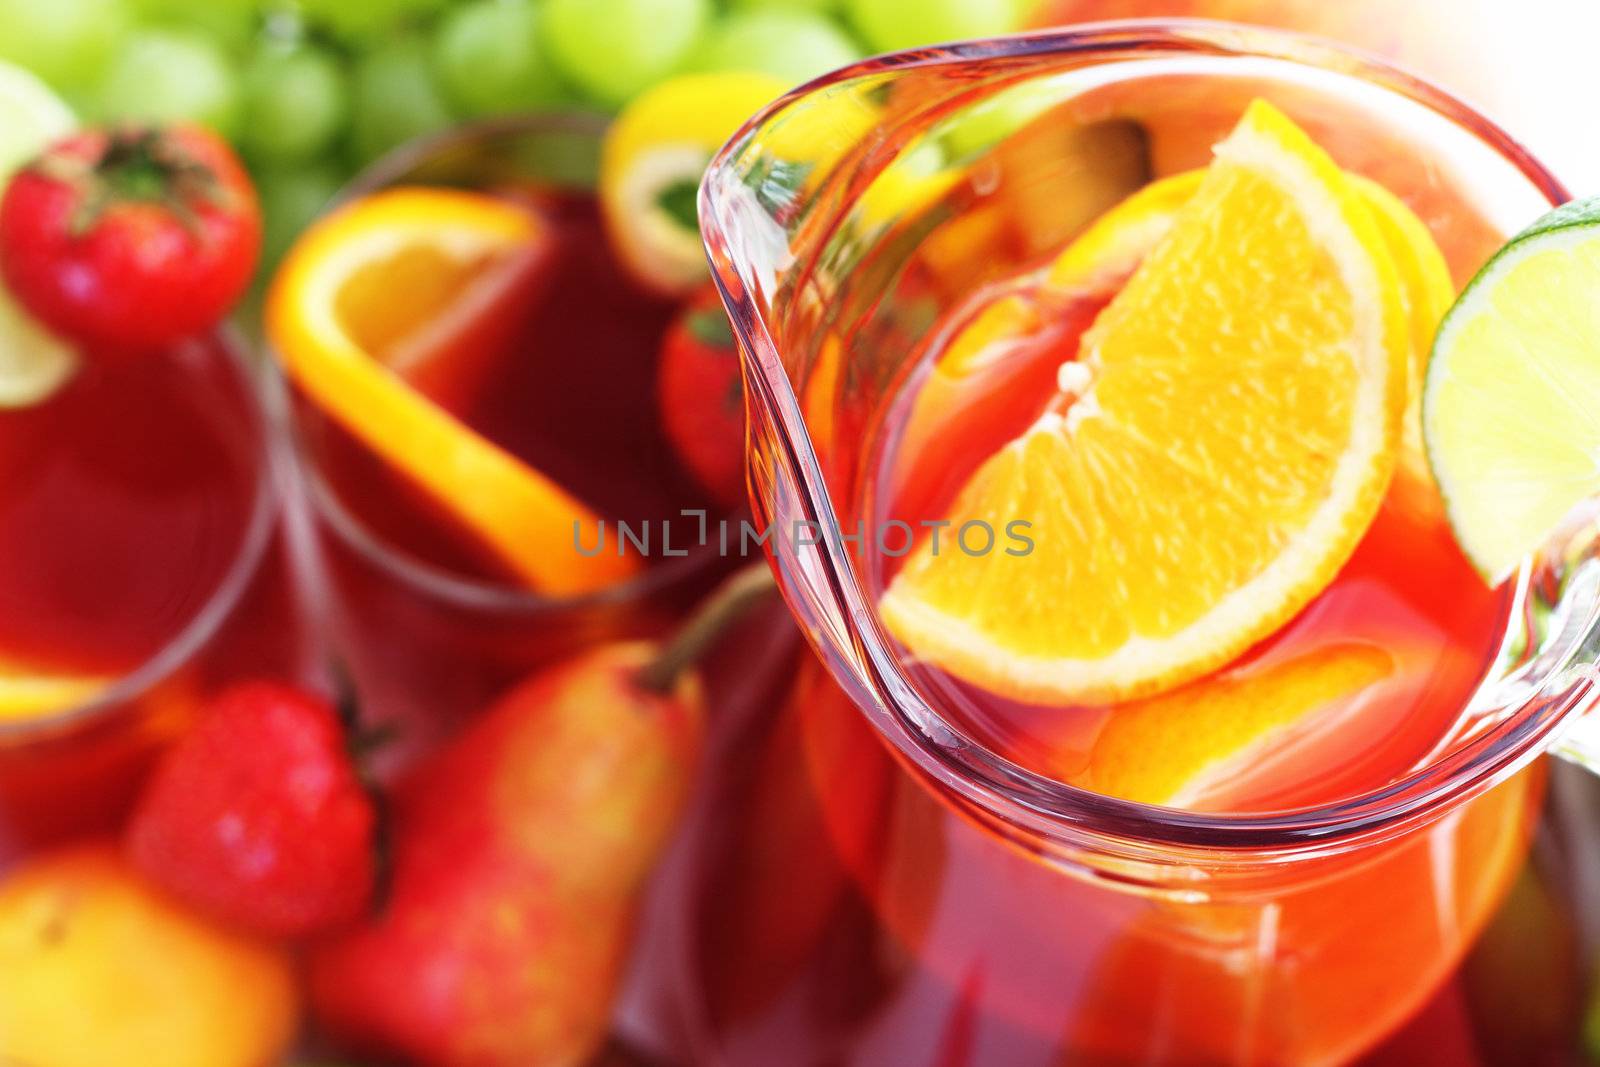 Refreshment beverage in pitcher with fruits  close-up background